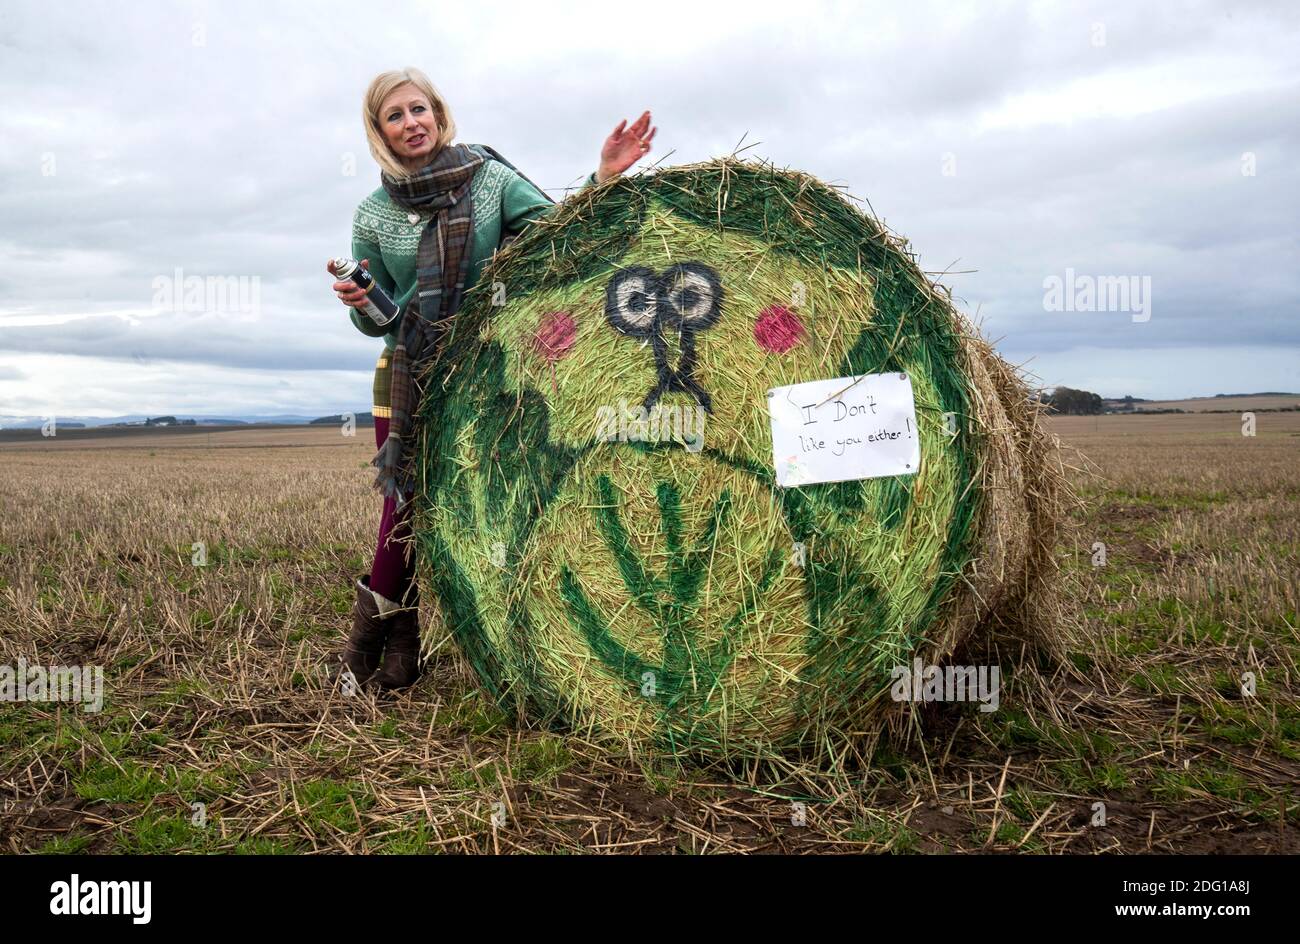 Farmer and artist Fleur Baxter with the Christmas character artworks she  has created using hay bales on her farm in Carmyllie, Angus. Fleur, who has  been nicknamed 'Balesy' by locals, allows members